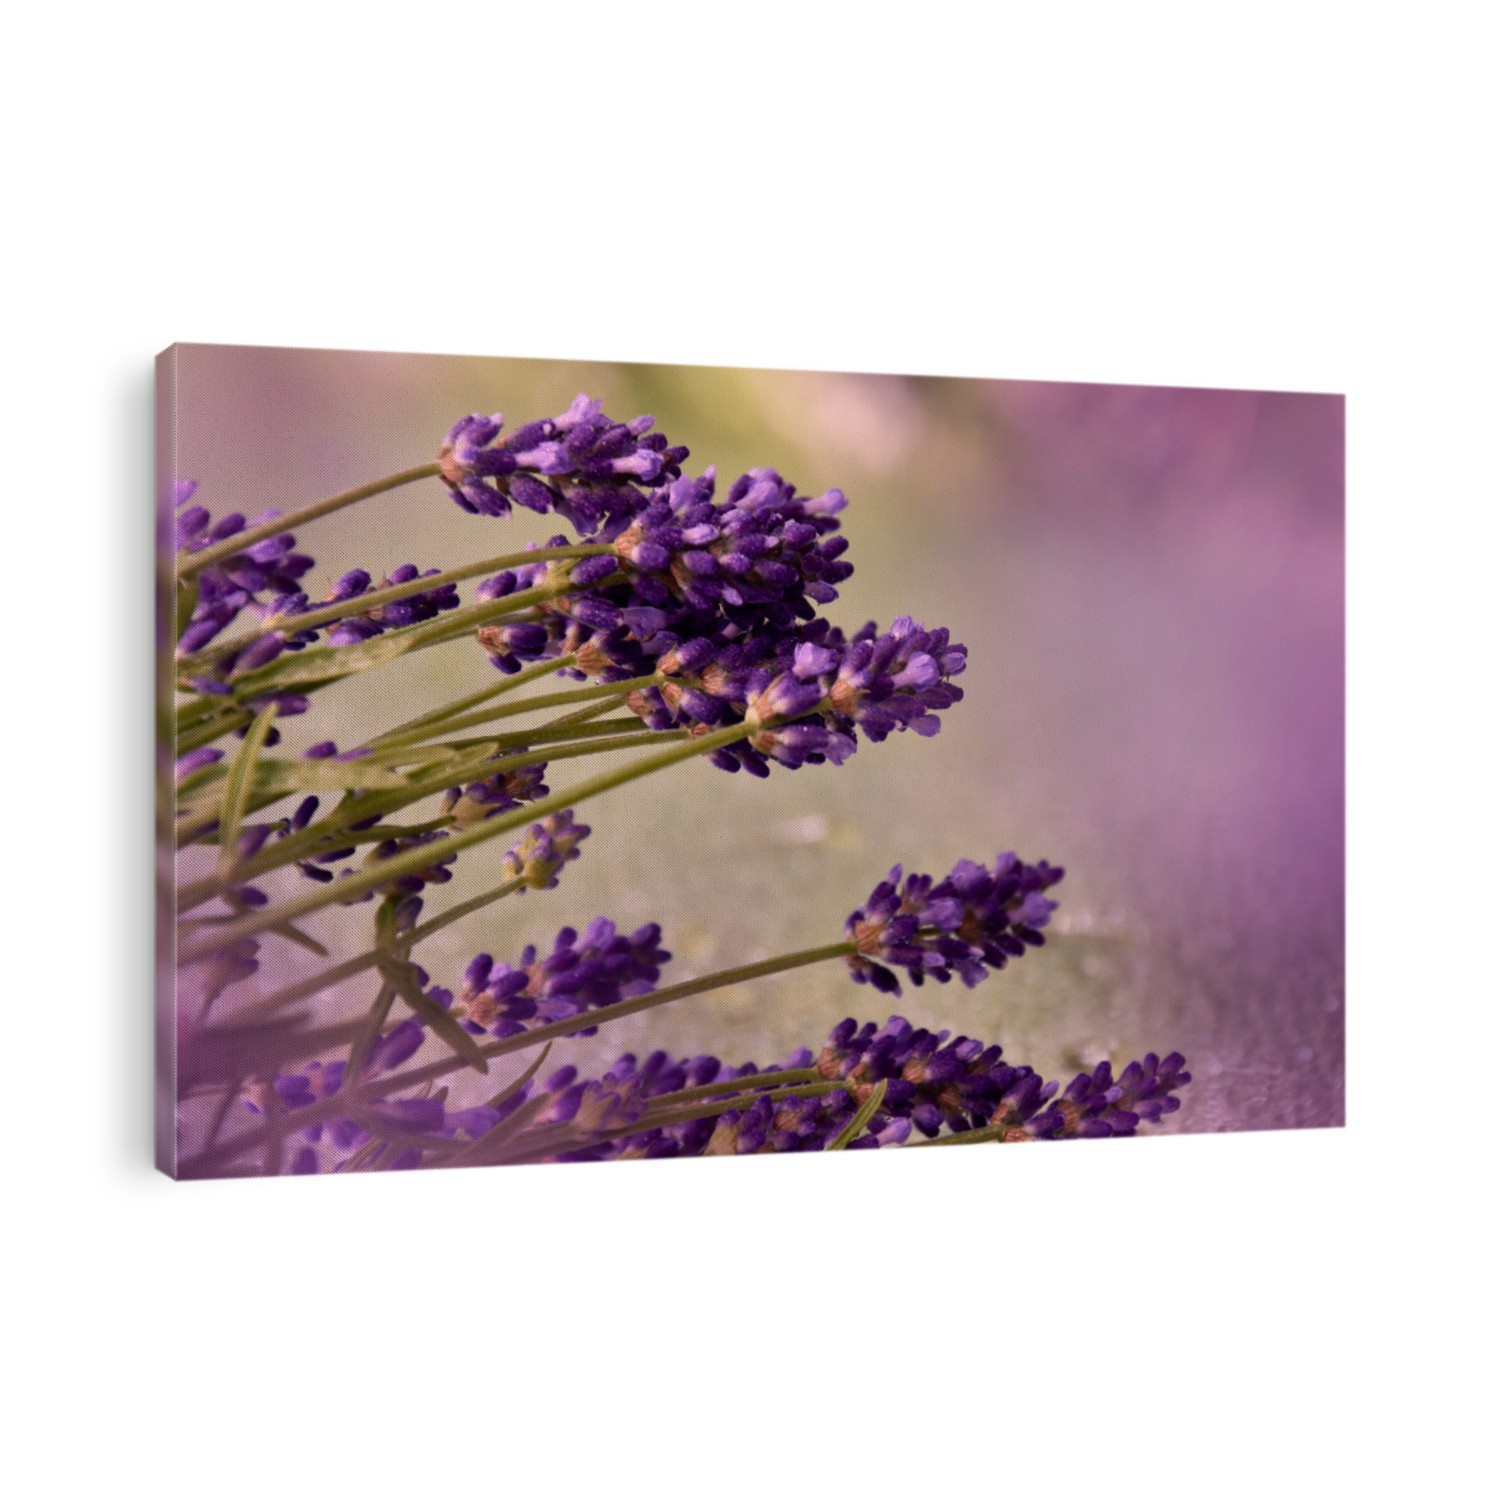 Beautiful fresh purple lavender plant detail stock images. Summer background with a bouquet of lavender. Flowerbed with fragrant lavender images. Provence floral decor background